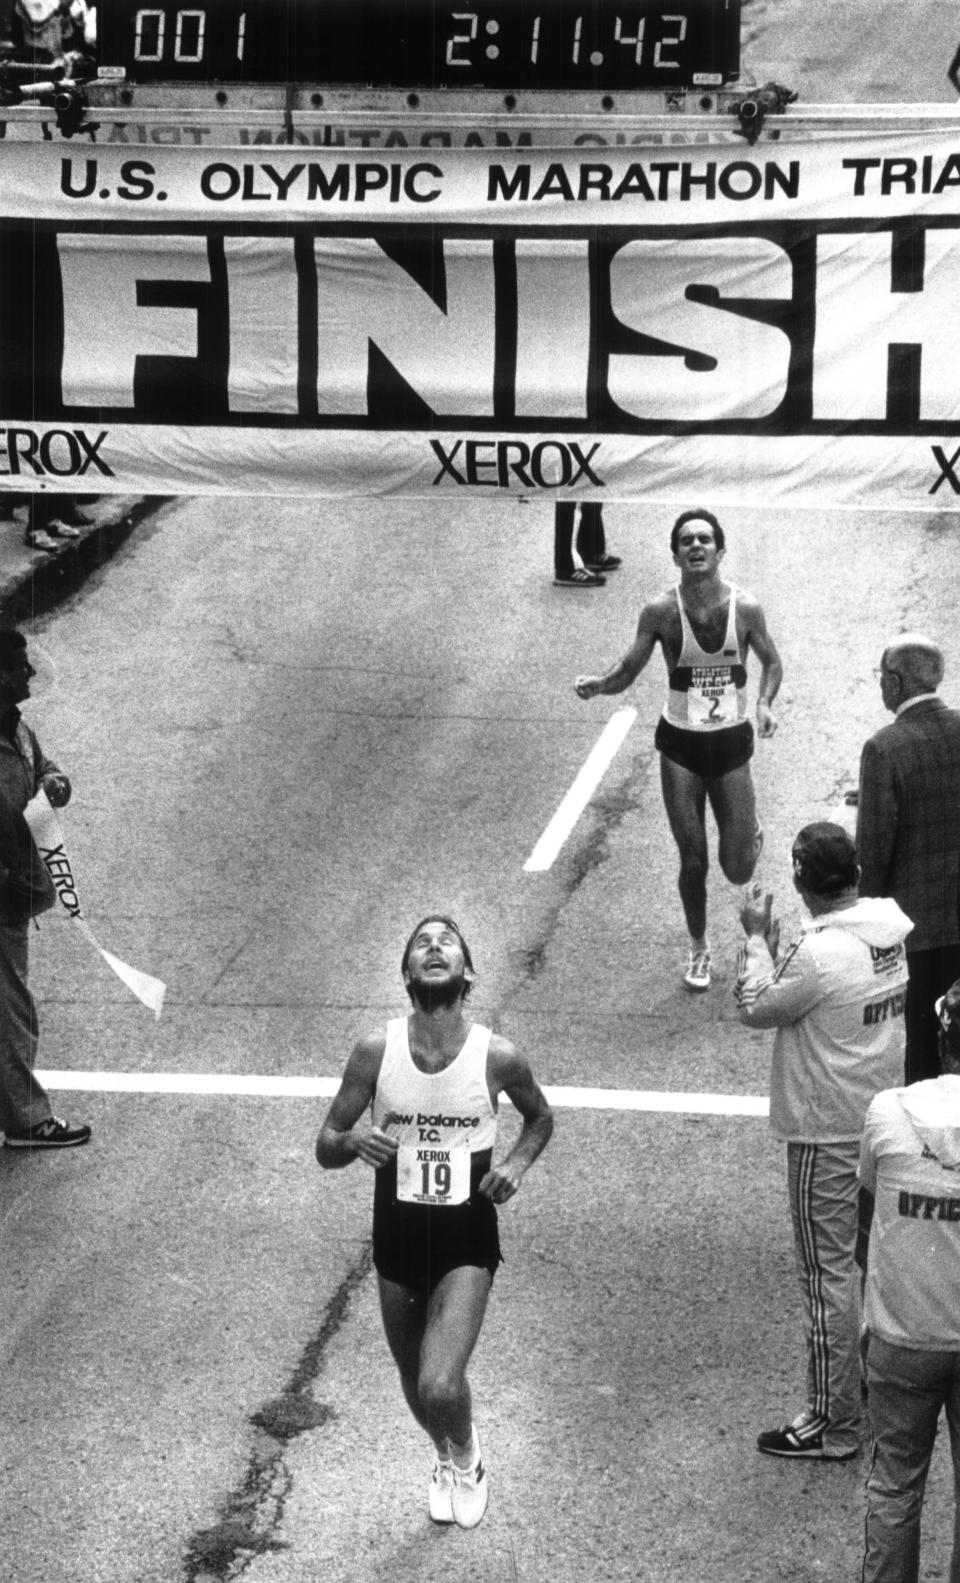 Pete Pfitzinger stunned the running world when he finished first in the Olympic Marathon Trial in Buffalo in 1984.